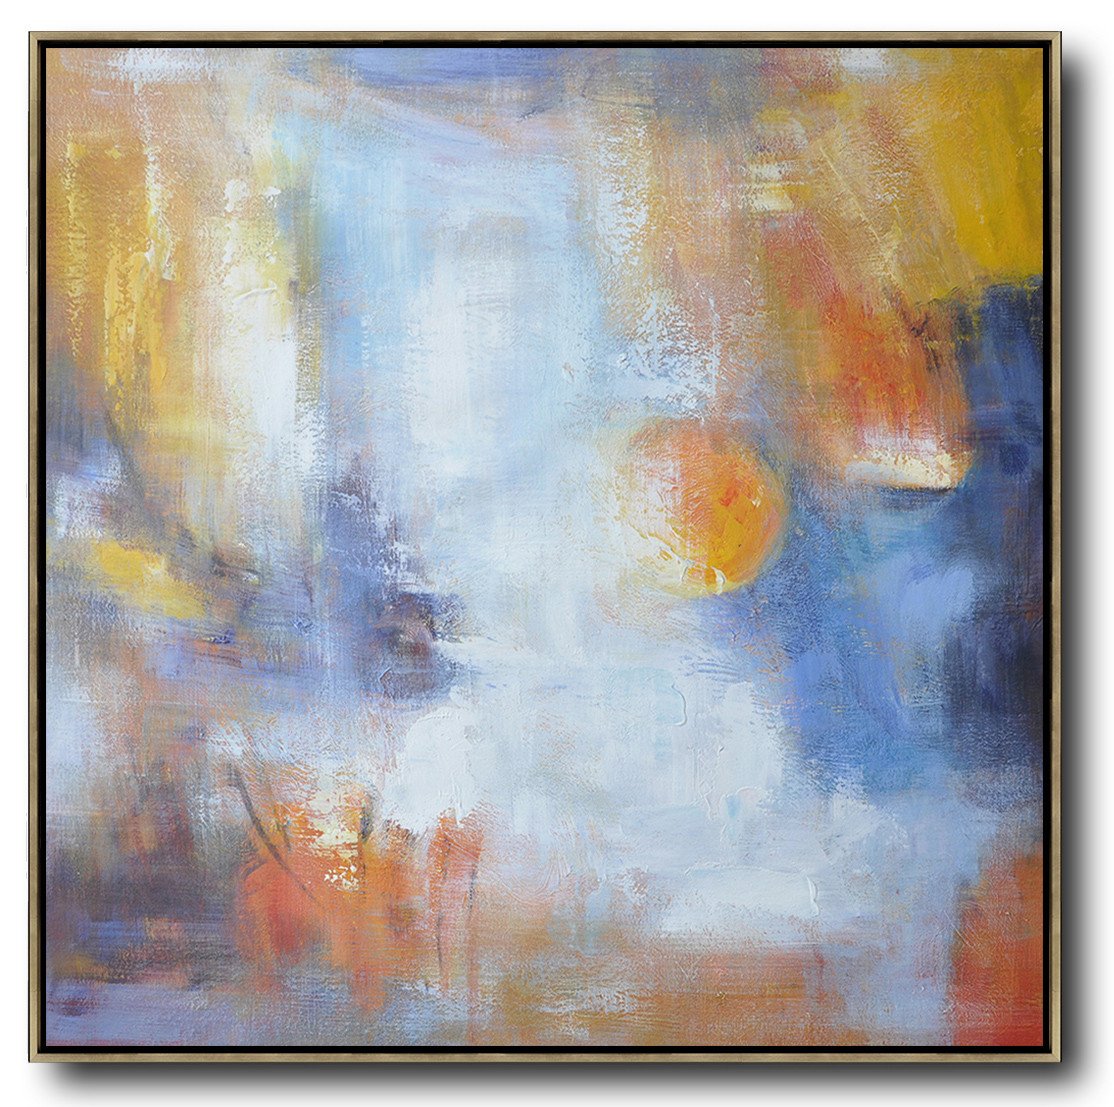 Hand-painted oversized Square Abstract Art contemporary art painting